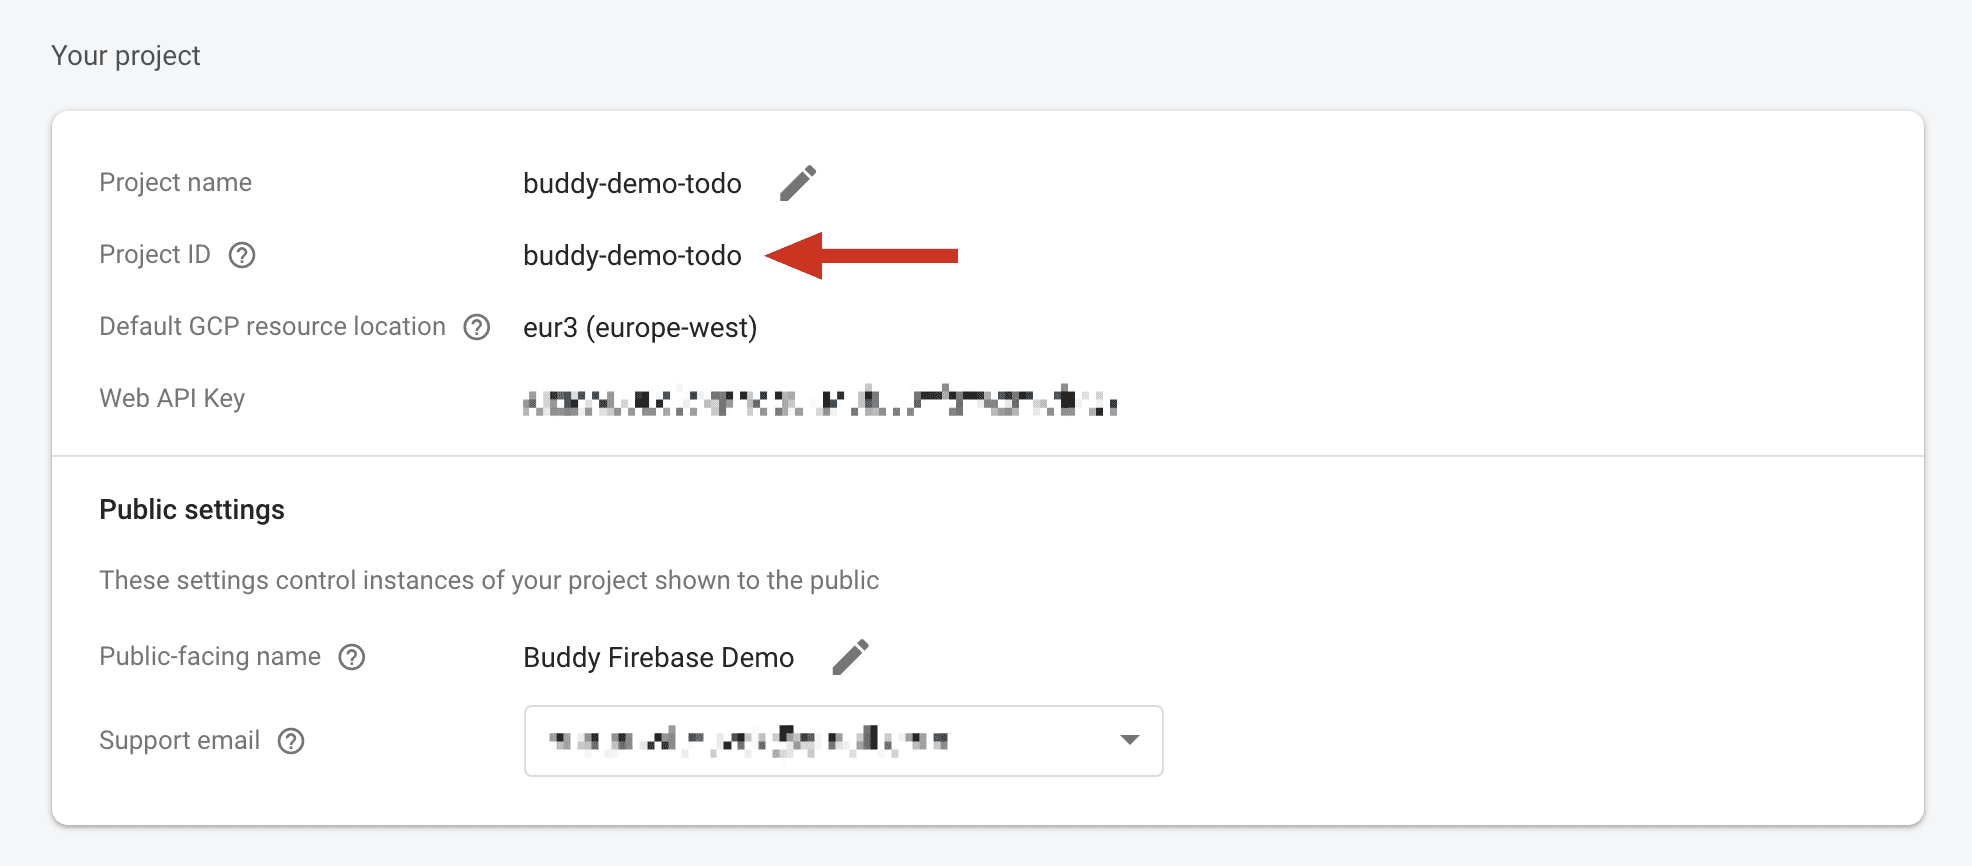 Checking Project ID in Firebase console